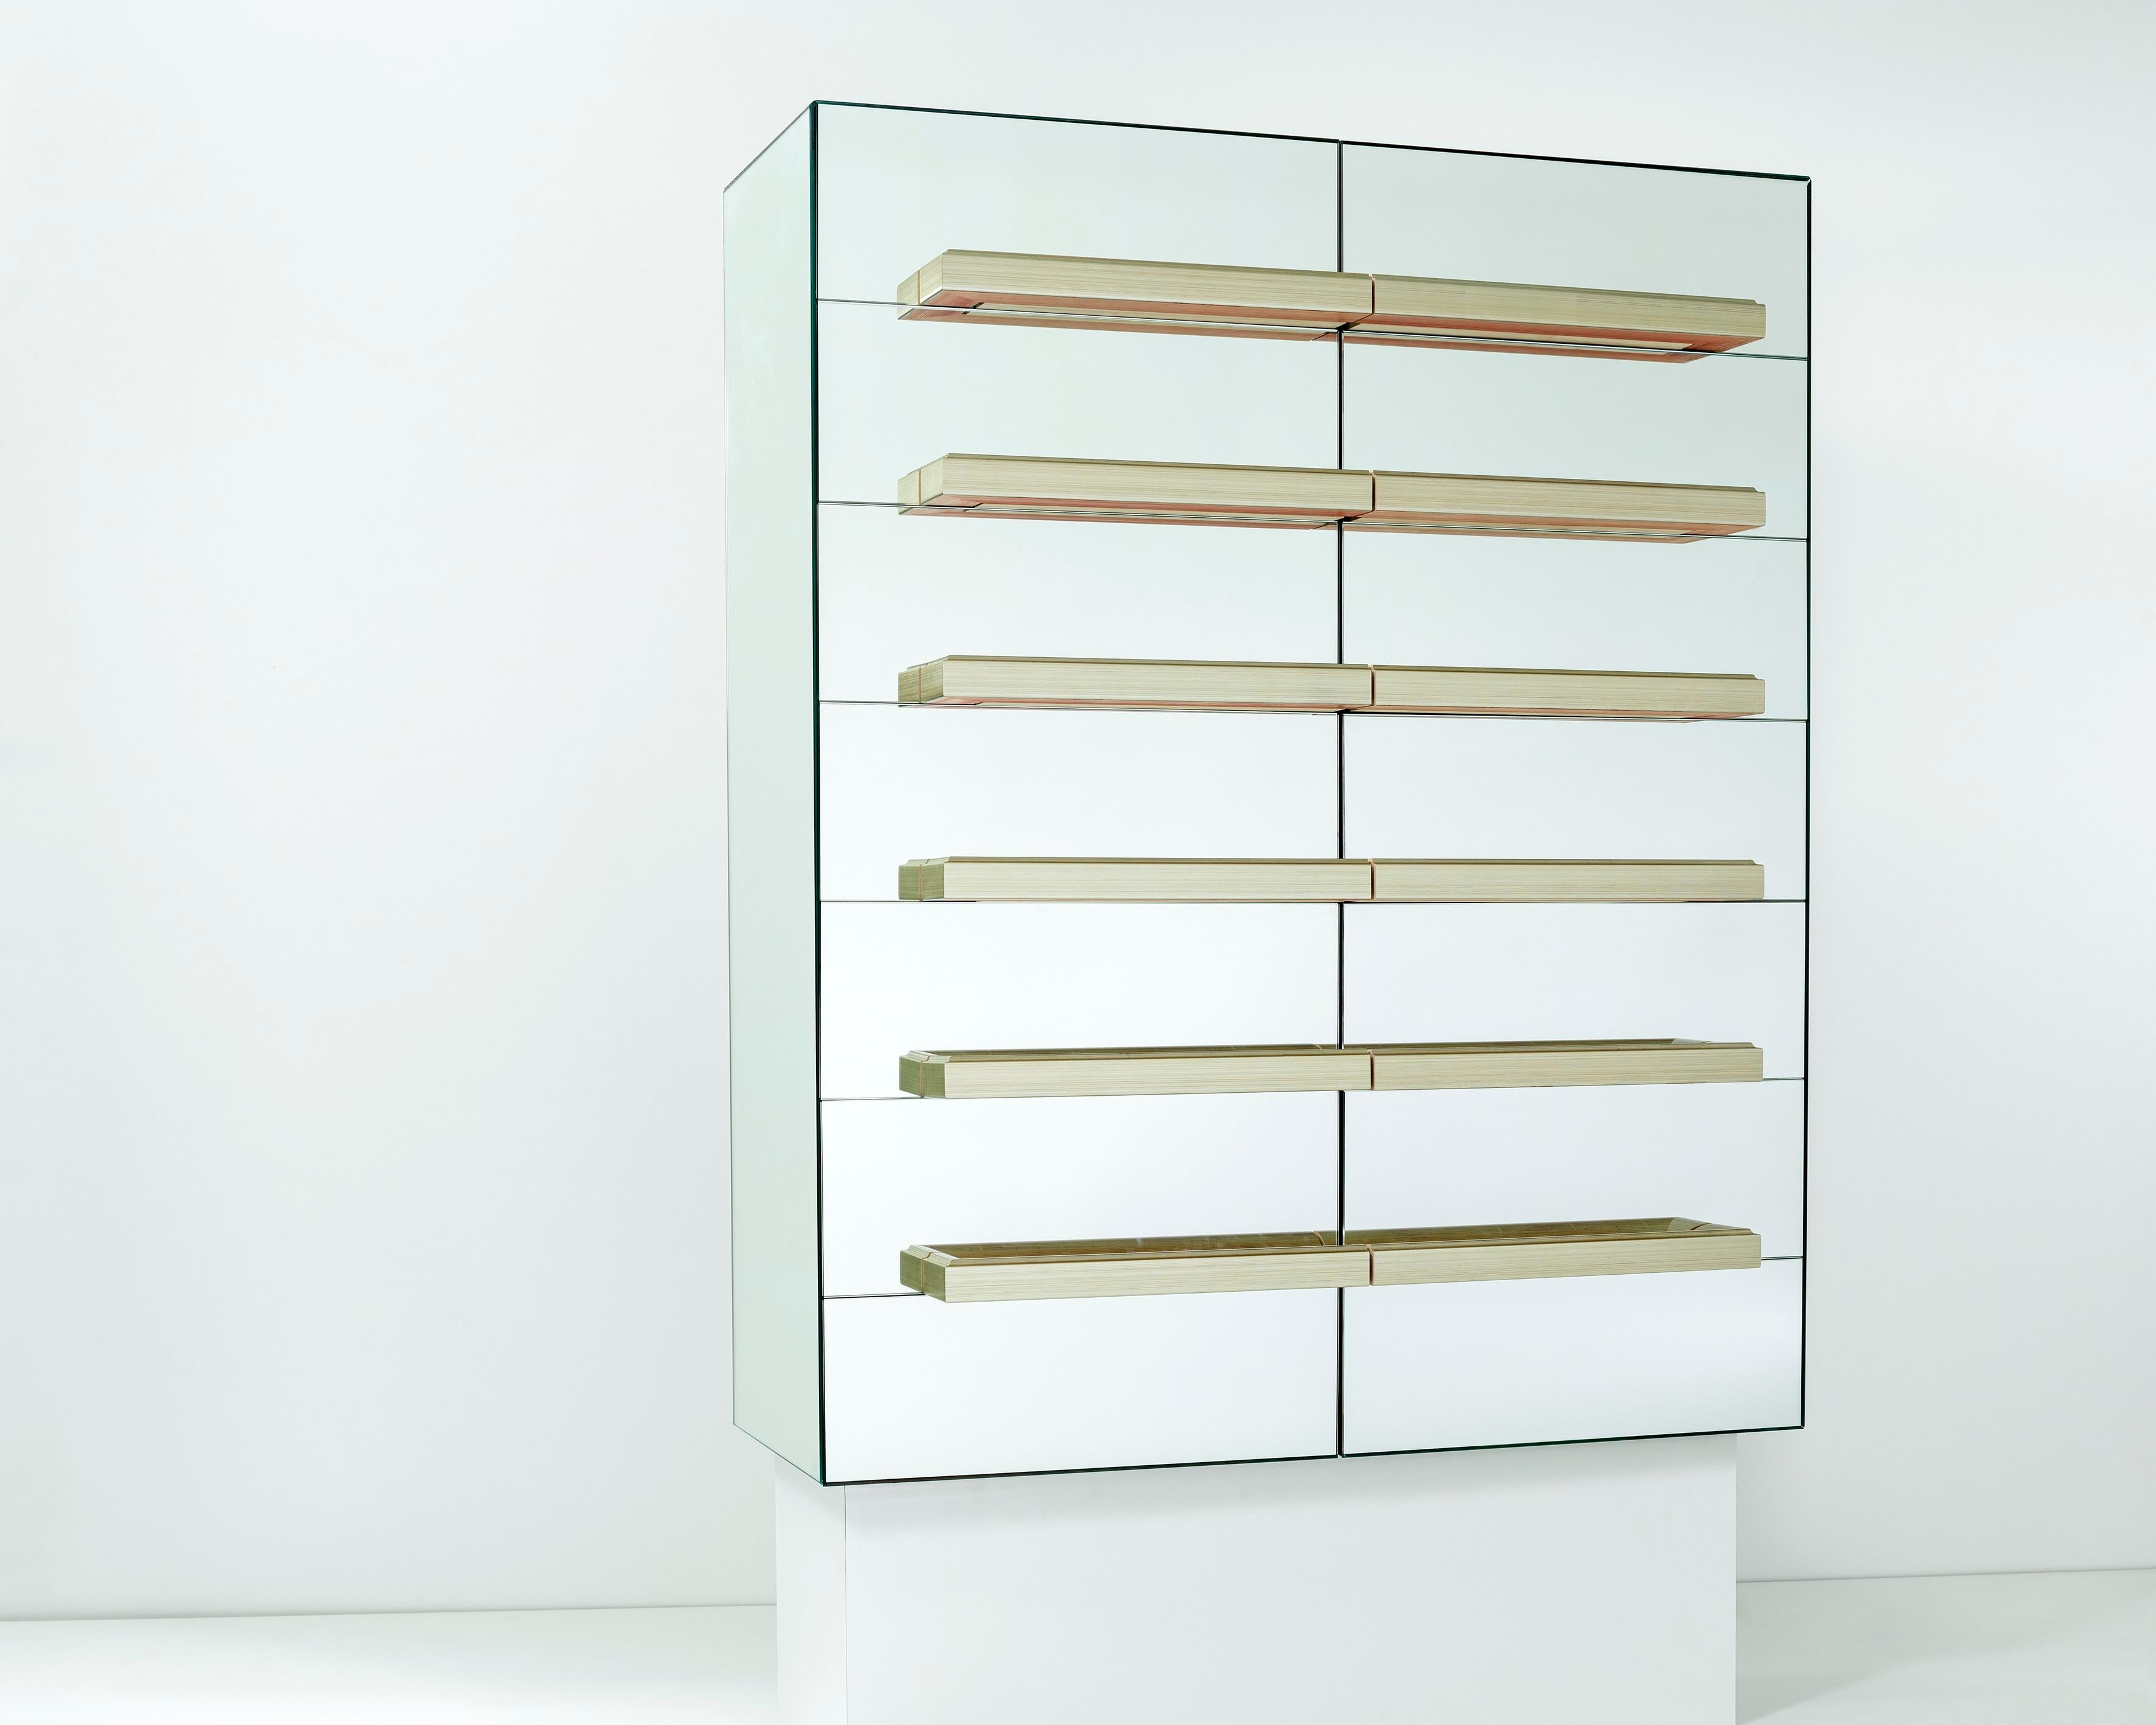 Illusion floating dry bar by Luis Pons.
Dimensions: W 101.5 x D 44 x H 124.5 cm
Materials: metal, mirror, wood, bronzed, hand-crafted, tempered.

Also available in different colors.

The traditional french mirror cabinet is reinterpreted